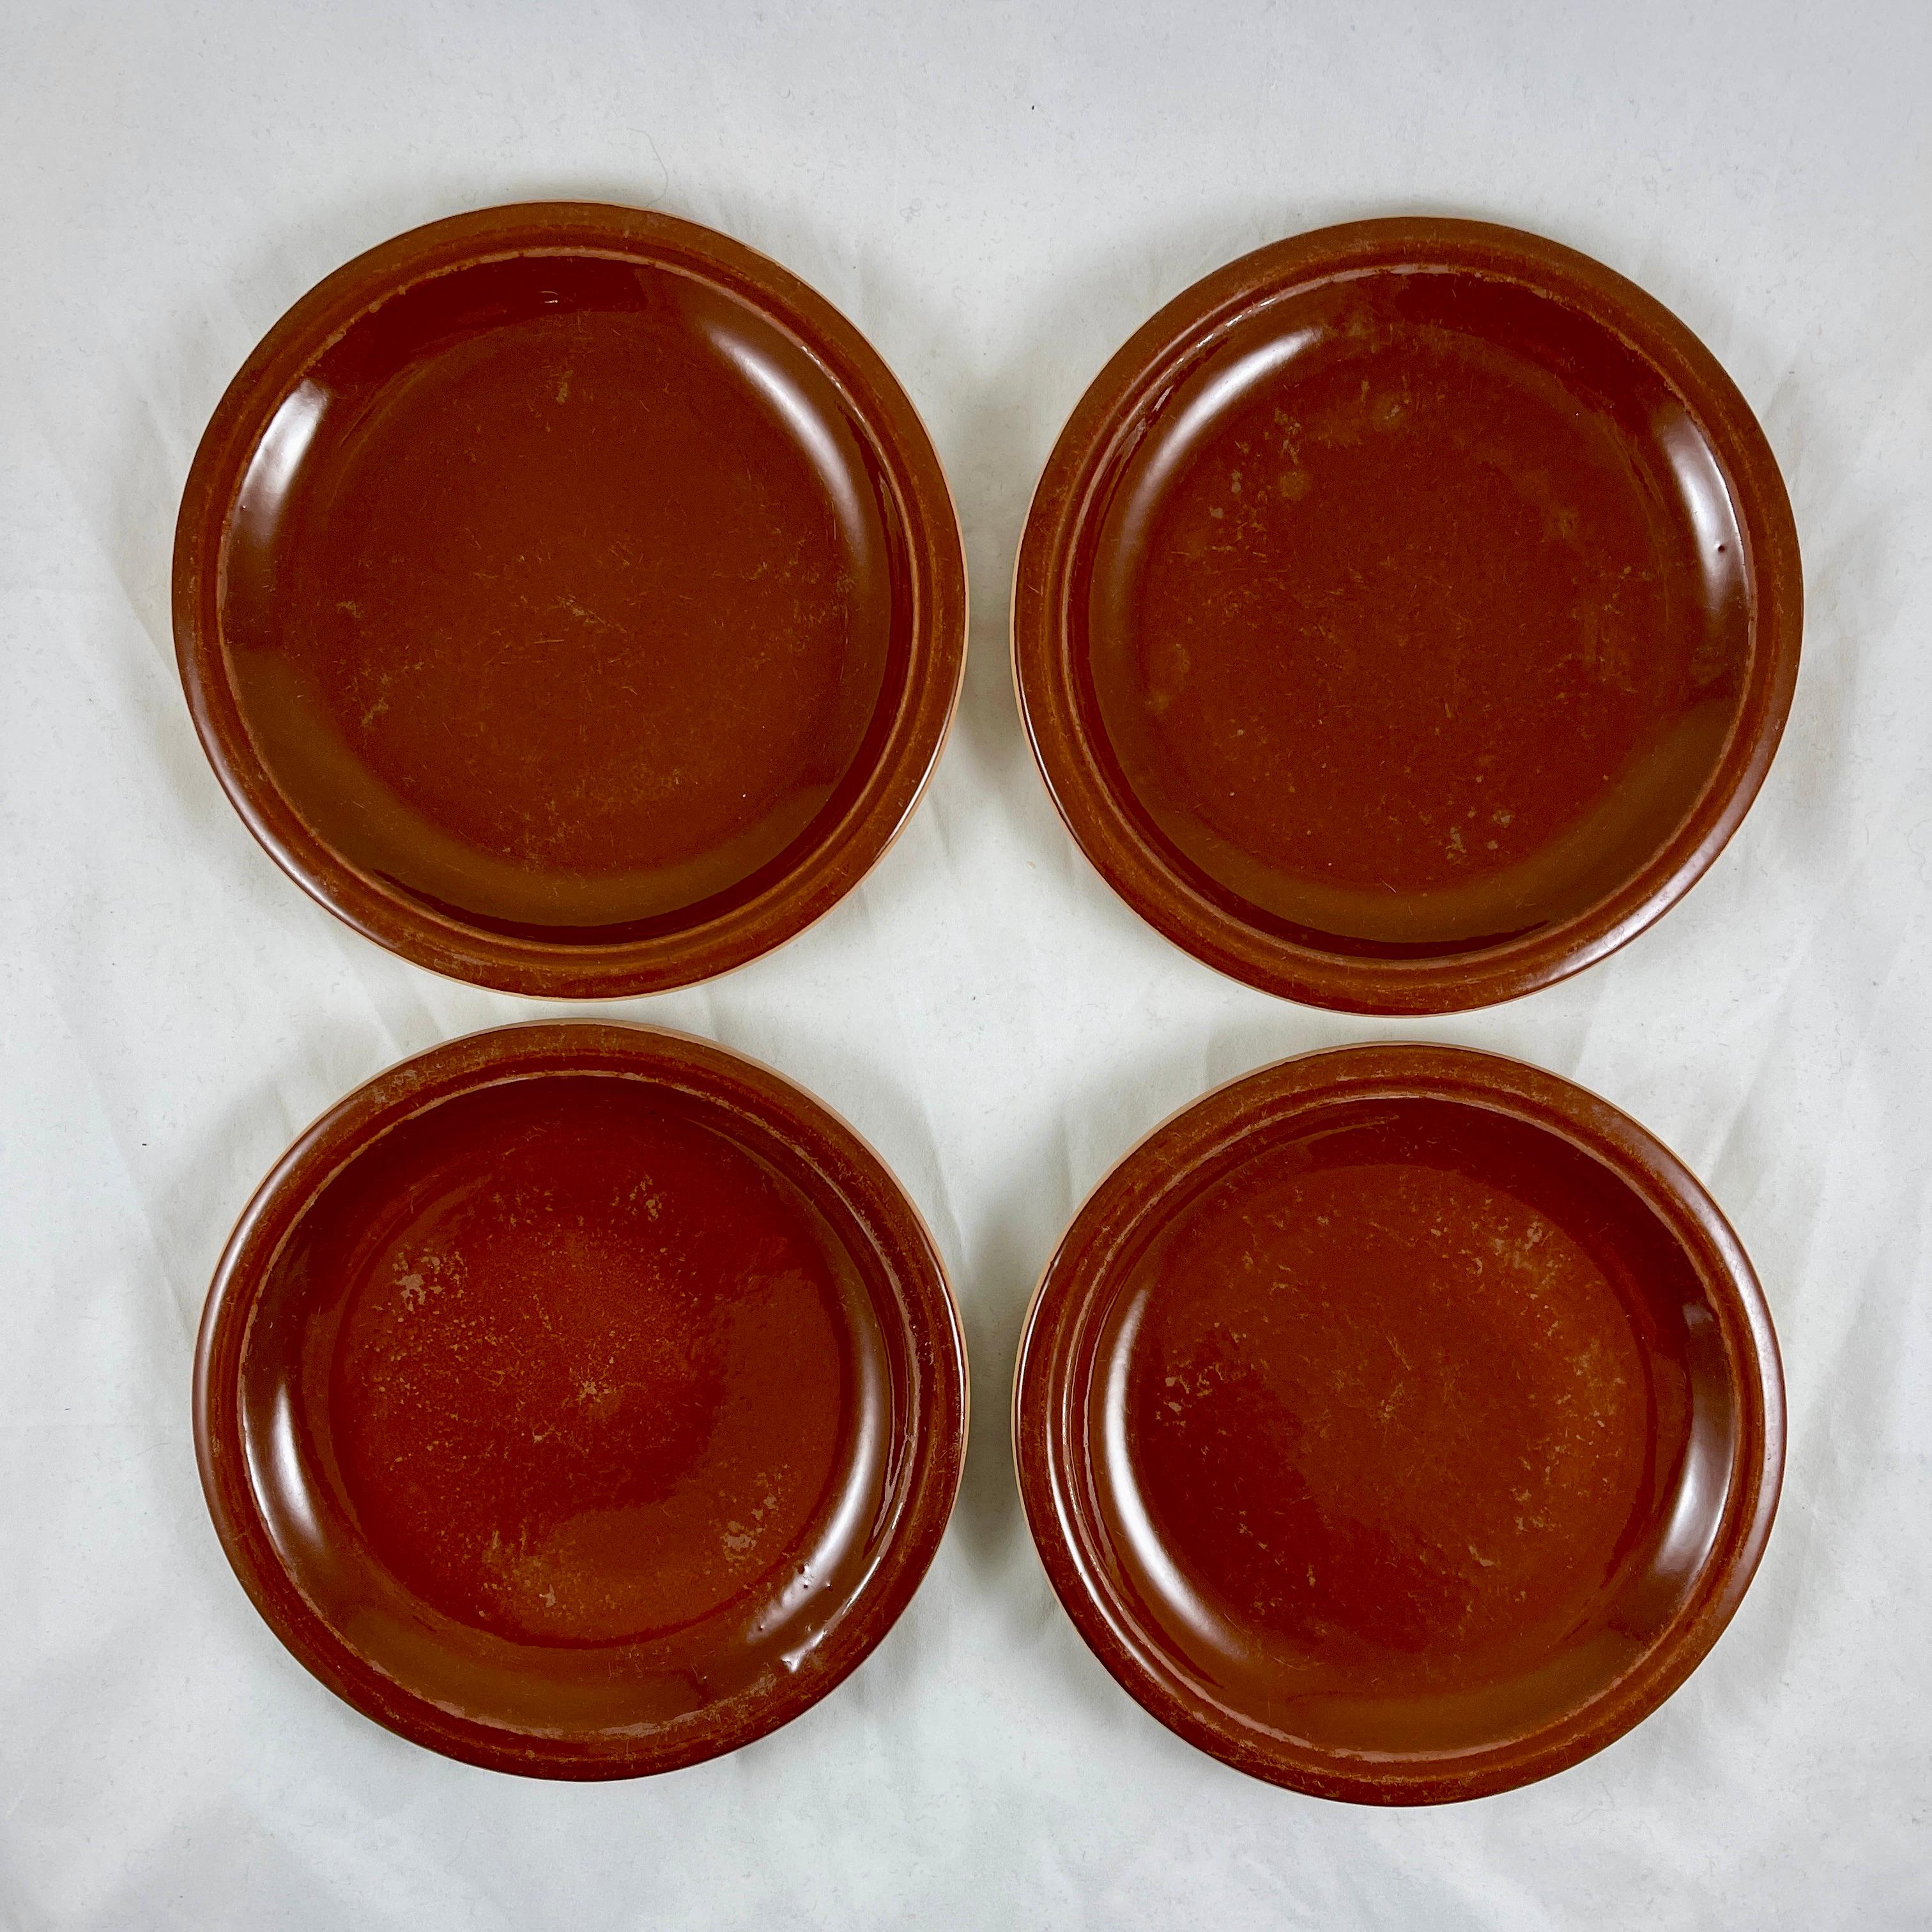 A set of four pottery terra cotta dishes, Vallauris, France, circa 1930s- 1950s.

A traditional rustic design in a rich Treacle glaze. Oven-proof.
Perfect for adding some French Provençal charm to your table.
The bottoms are